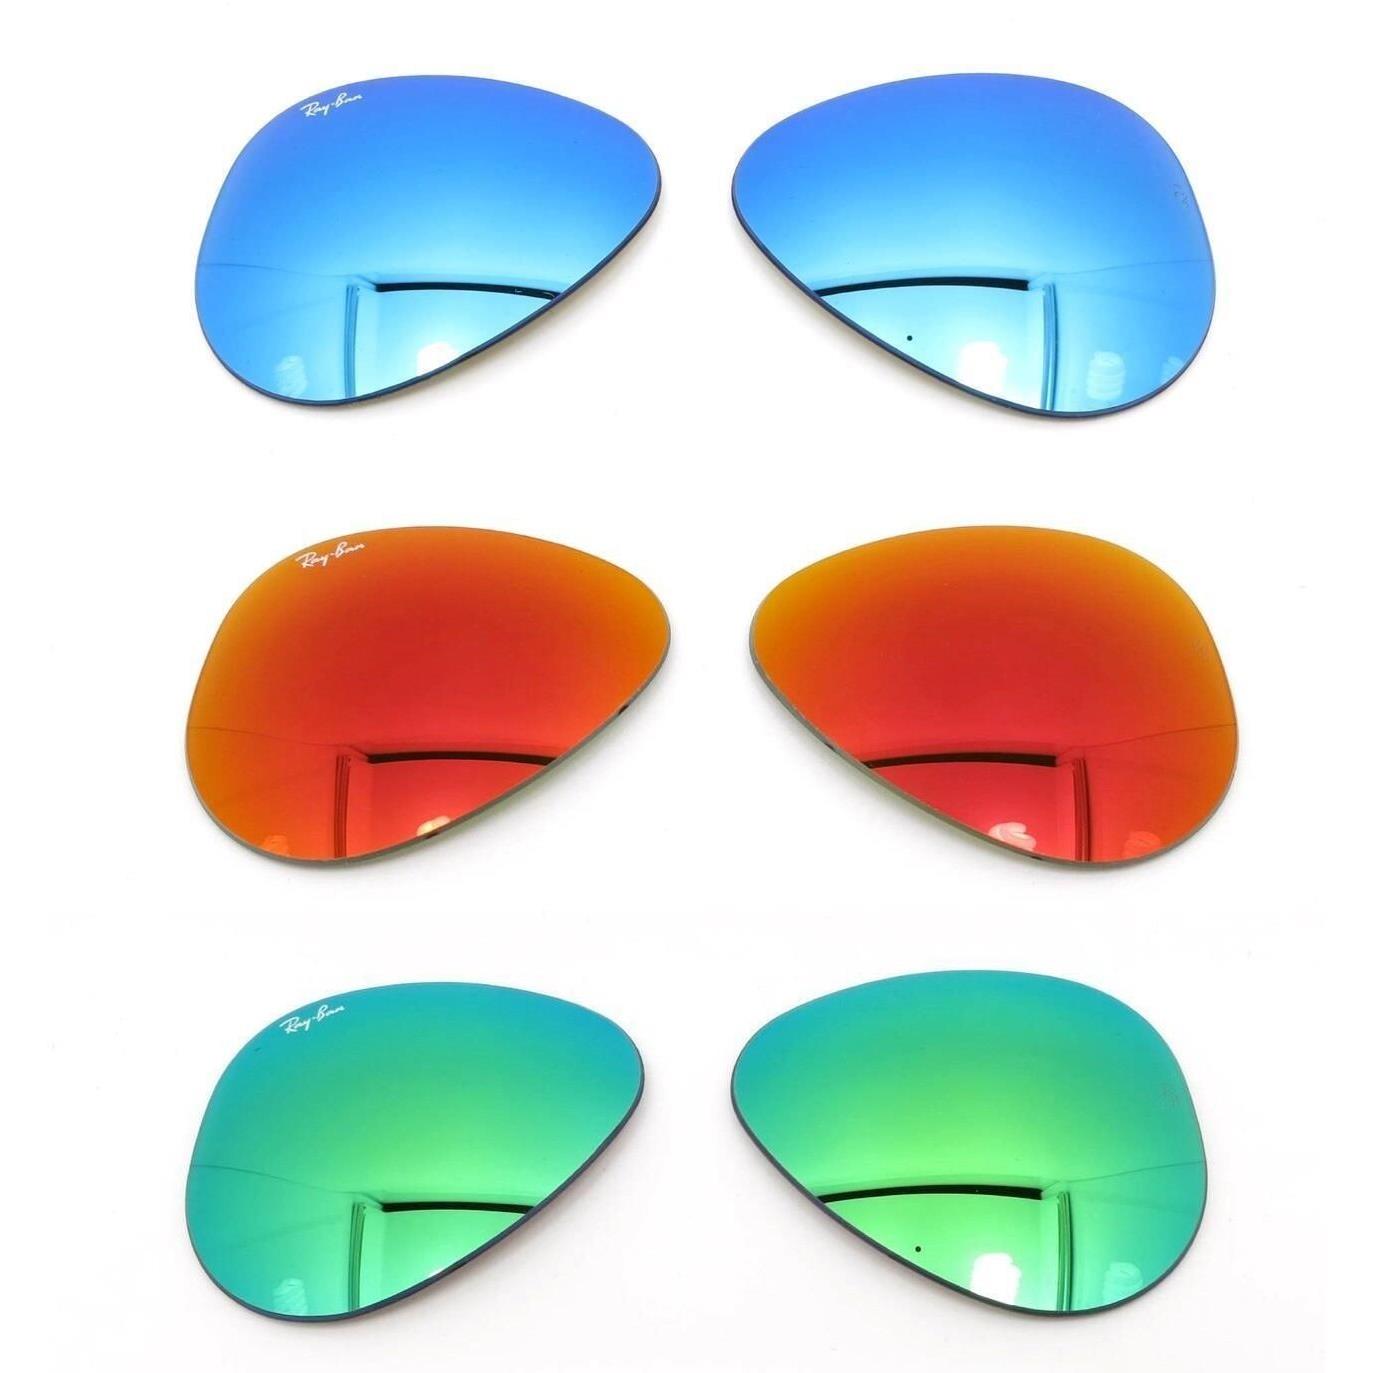 Ray-ban Ray Ban 3025 Replacement Lenses Aviator 112 Mirror Blue Orange or Green